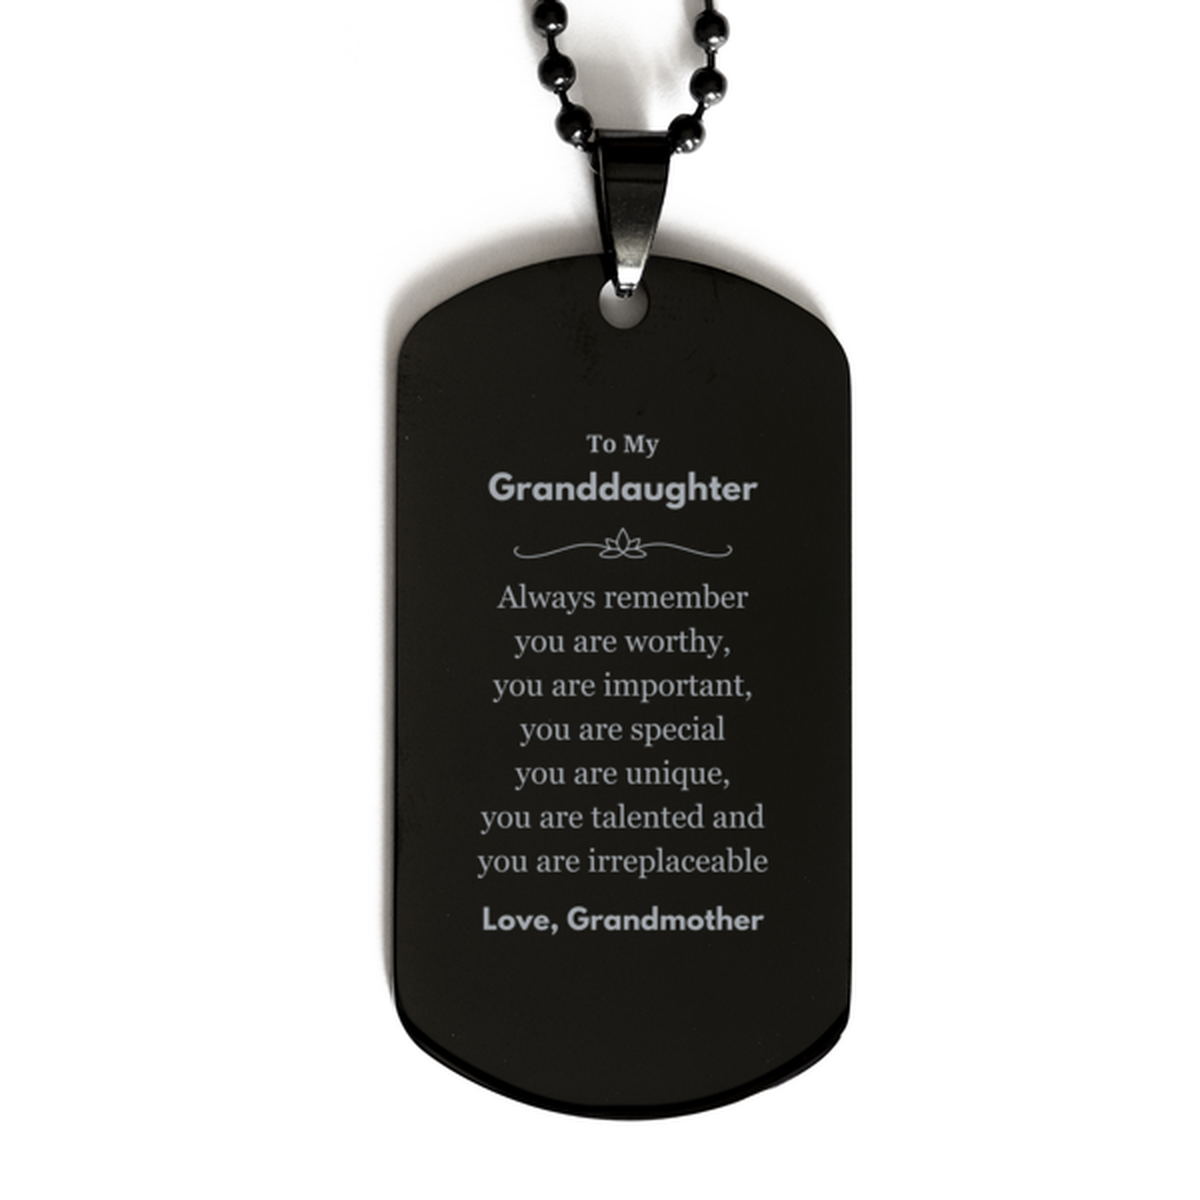 Granddaughter Birthday Gifts from Grandmother, Inspirational Black Dog Tag for Granddaughter Christmas Graduation Gifts for Granddaughter Always remember you are worthy, you are important. Love, Grandmother